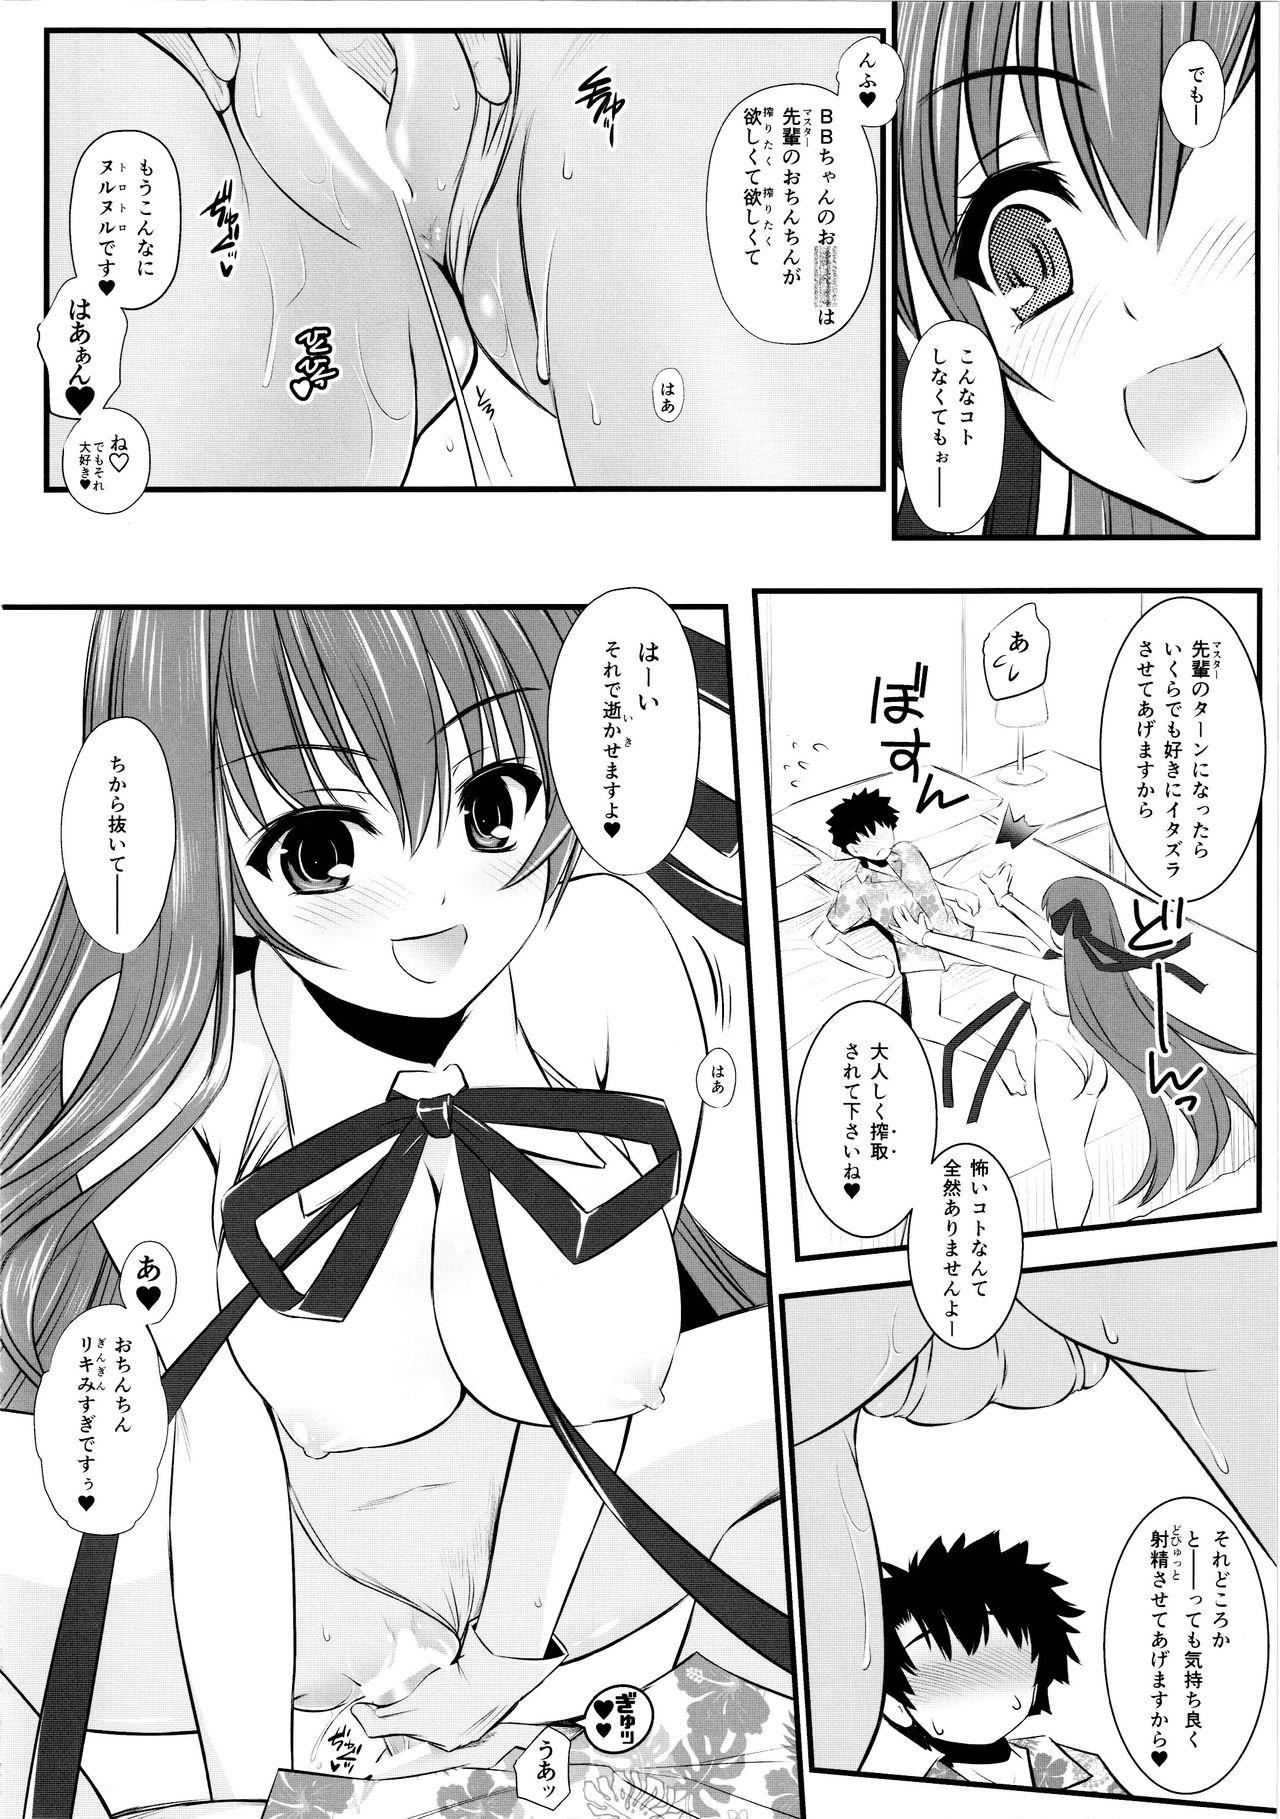 Livecams (C96) [Yakan Honpo (Inoue Tommy)] Queen [Kyuuin] BB-chan (Fate/Grand Order) - Fate grand order Argentino - Page 8